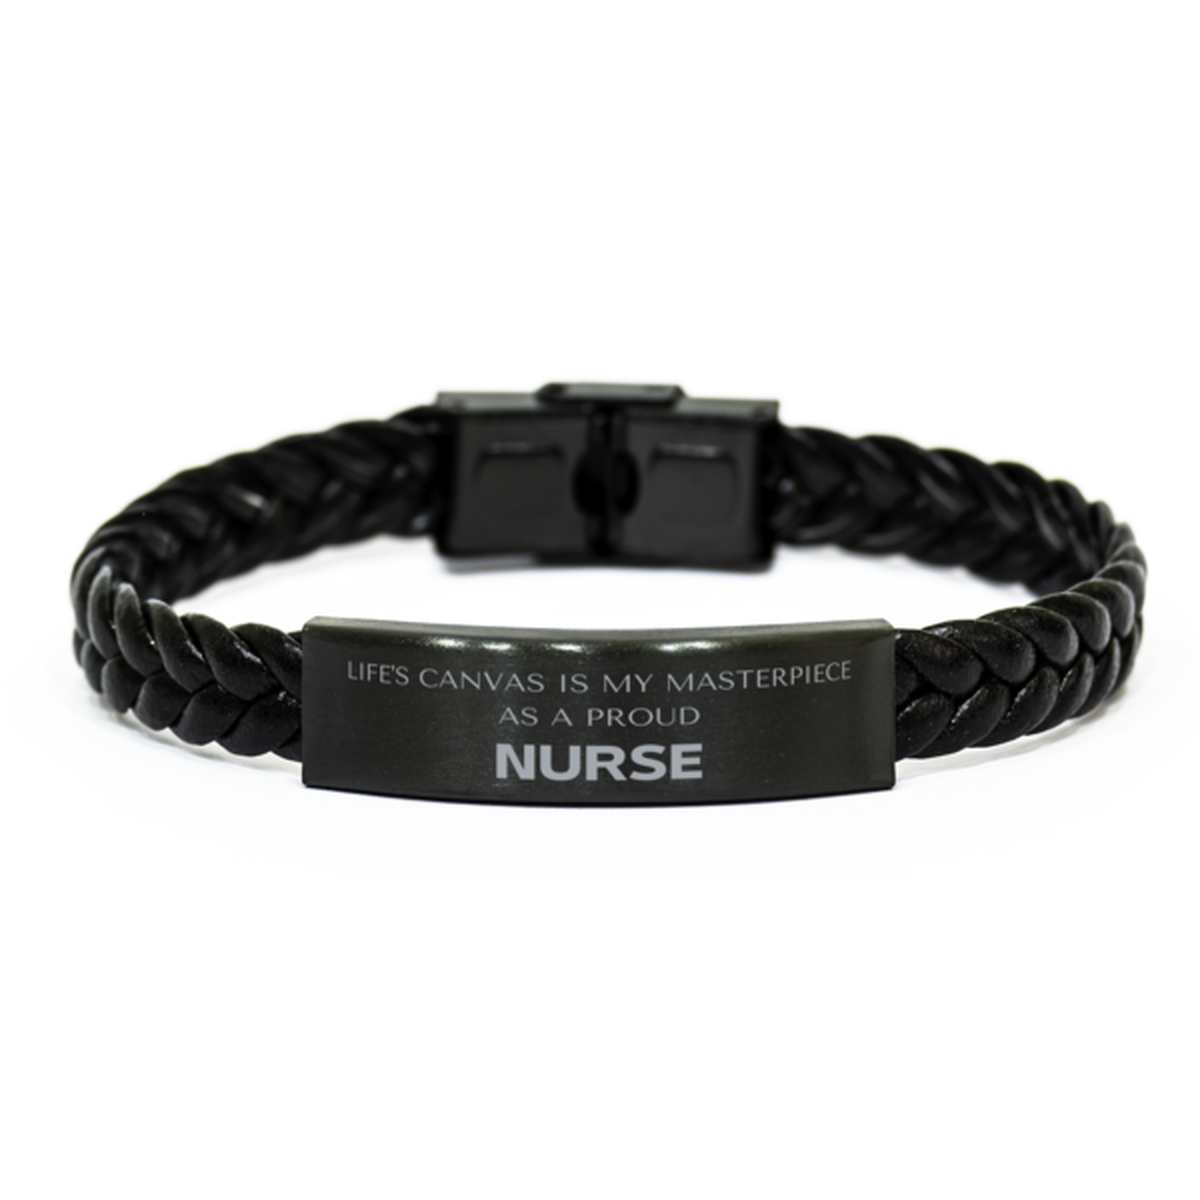 Proud Nurse Gifts, Life's canvas is my masterpiece, Epic Birthday Christmas Unique Braided Leather Bracelet For Nurse, Coworkers, Men, Women, Friends